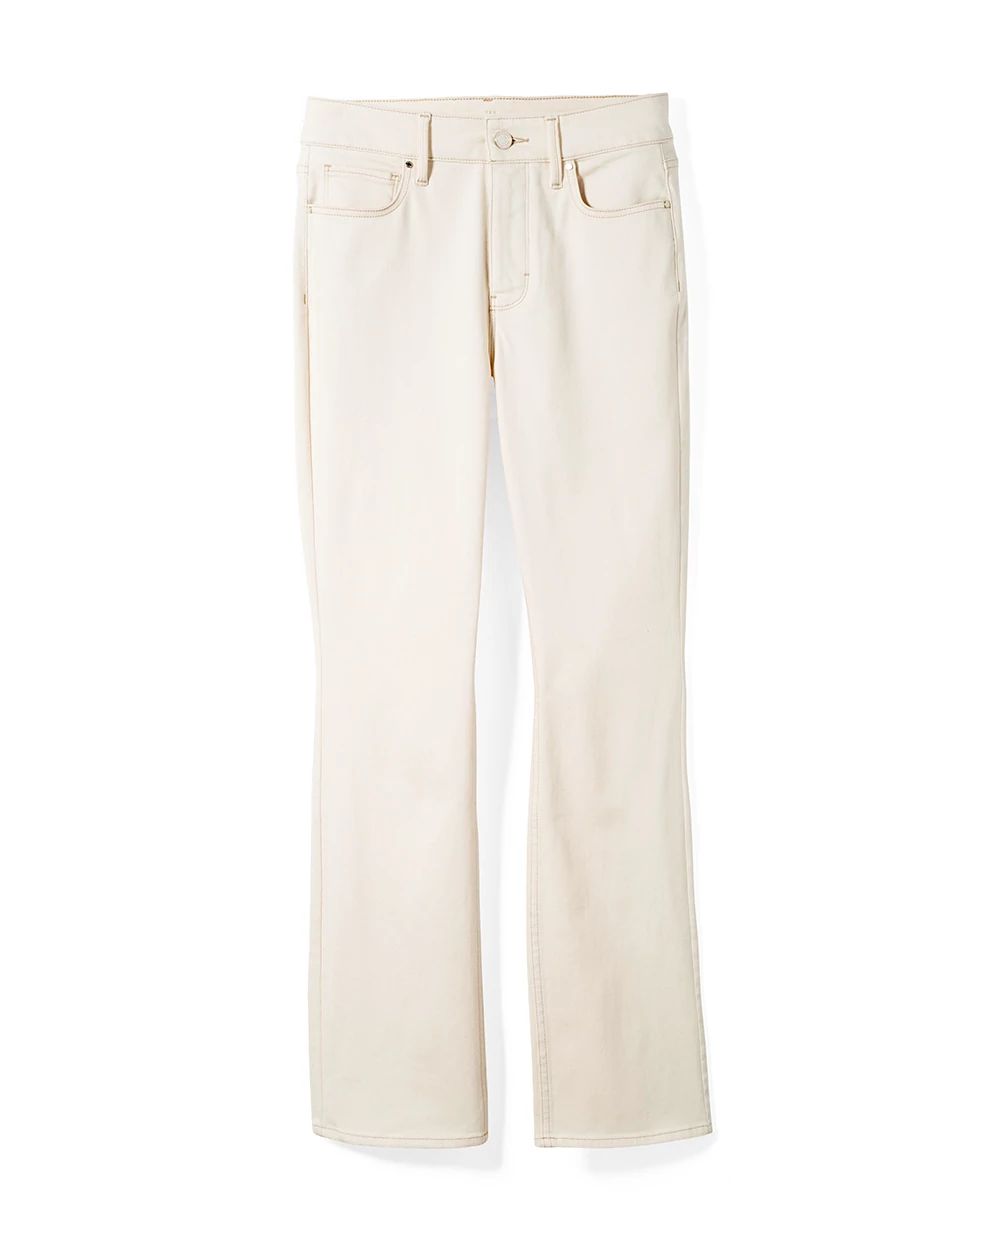 Petite High-Rise Natural Boot Cut Cropped Jeans click to view larger image.